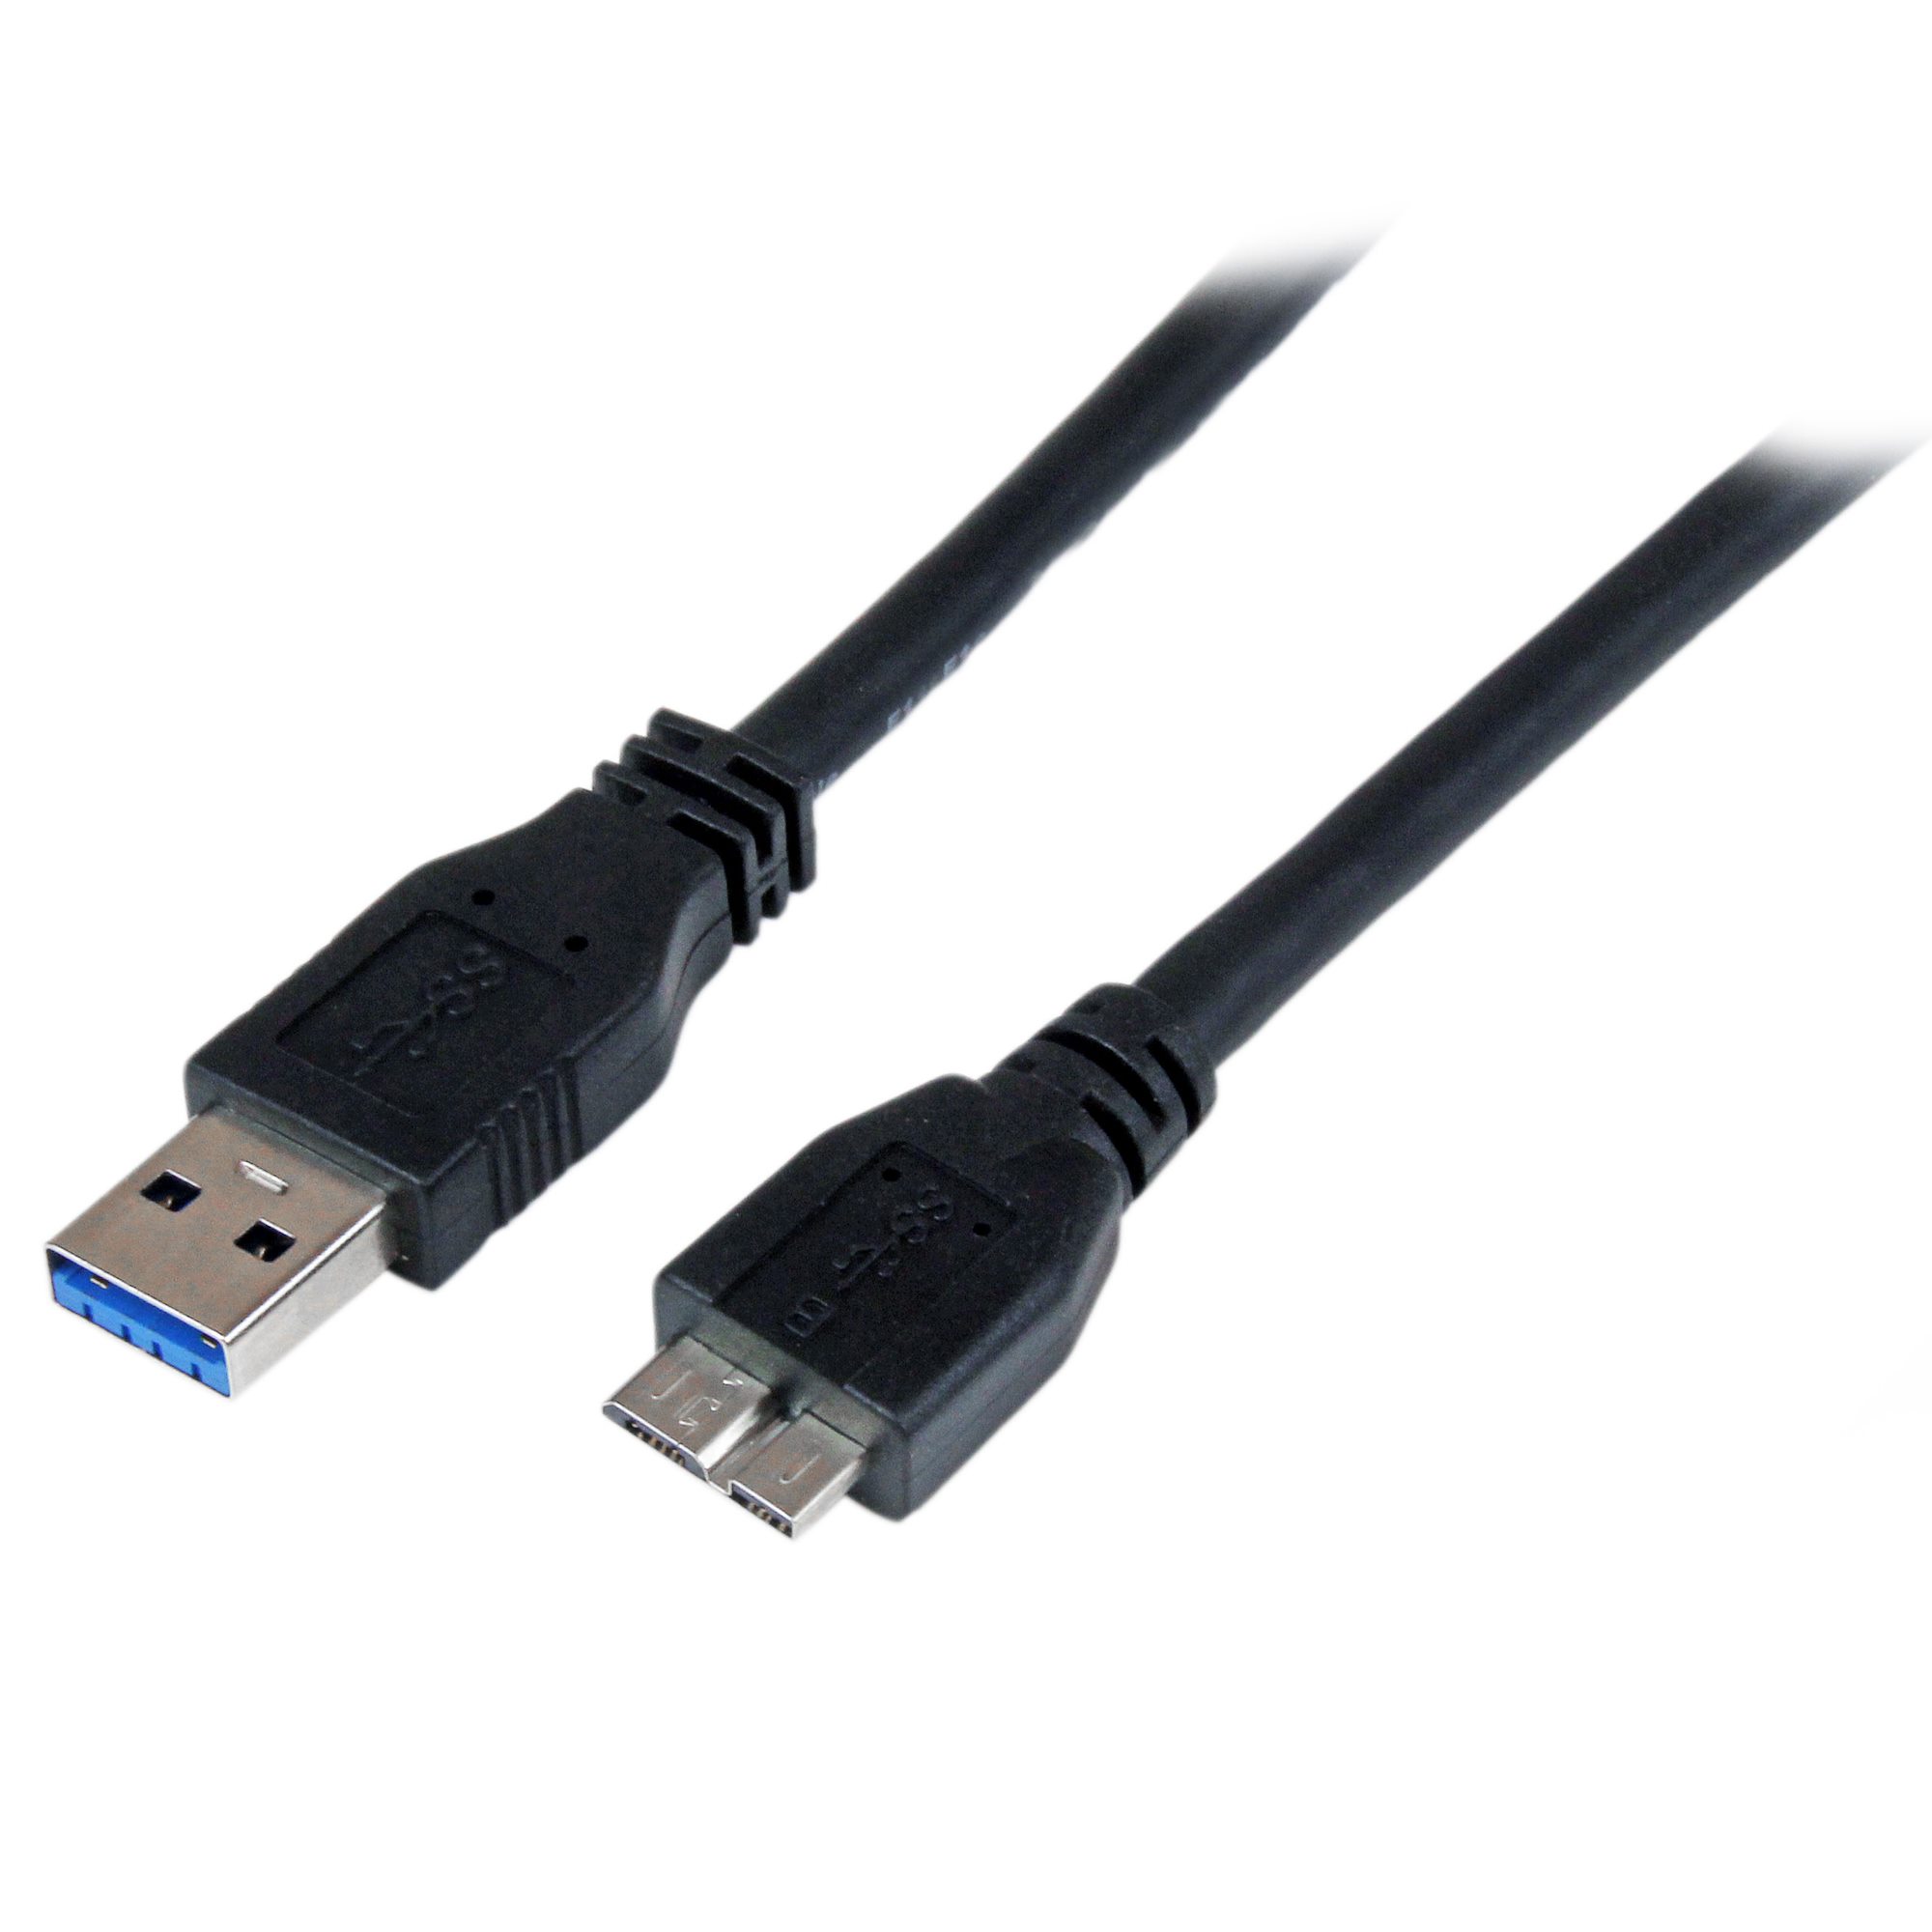 Ingresos Heredero Subtropical 1m 3 ft Certified USB 3.0 Micro B cable - USB 3.0 Cables | StarTech.com  Finland